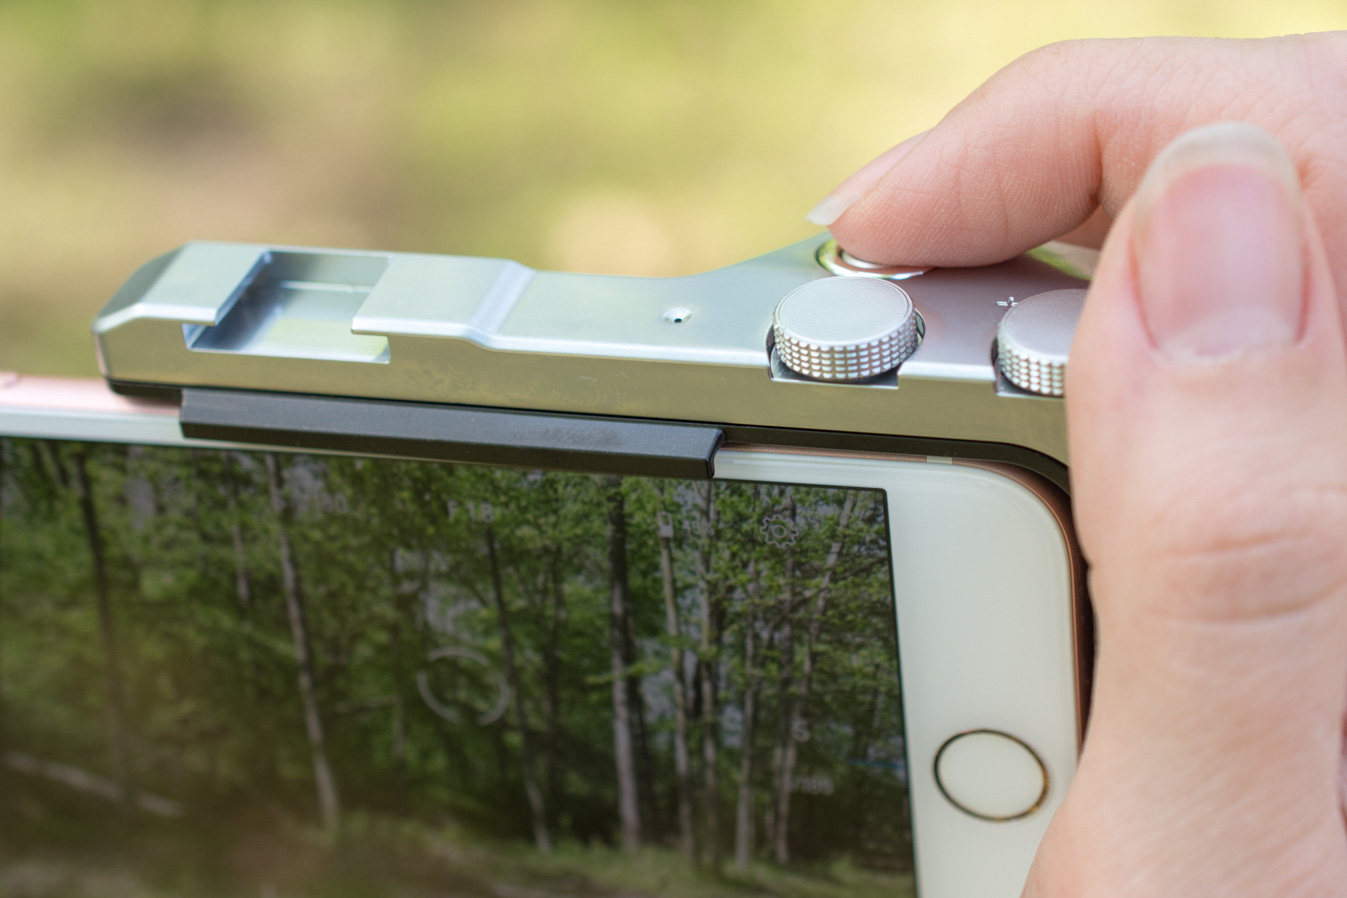 pictar iphone camera case review wm 6